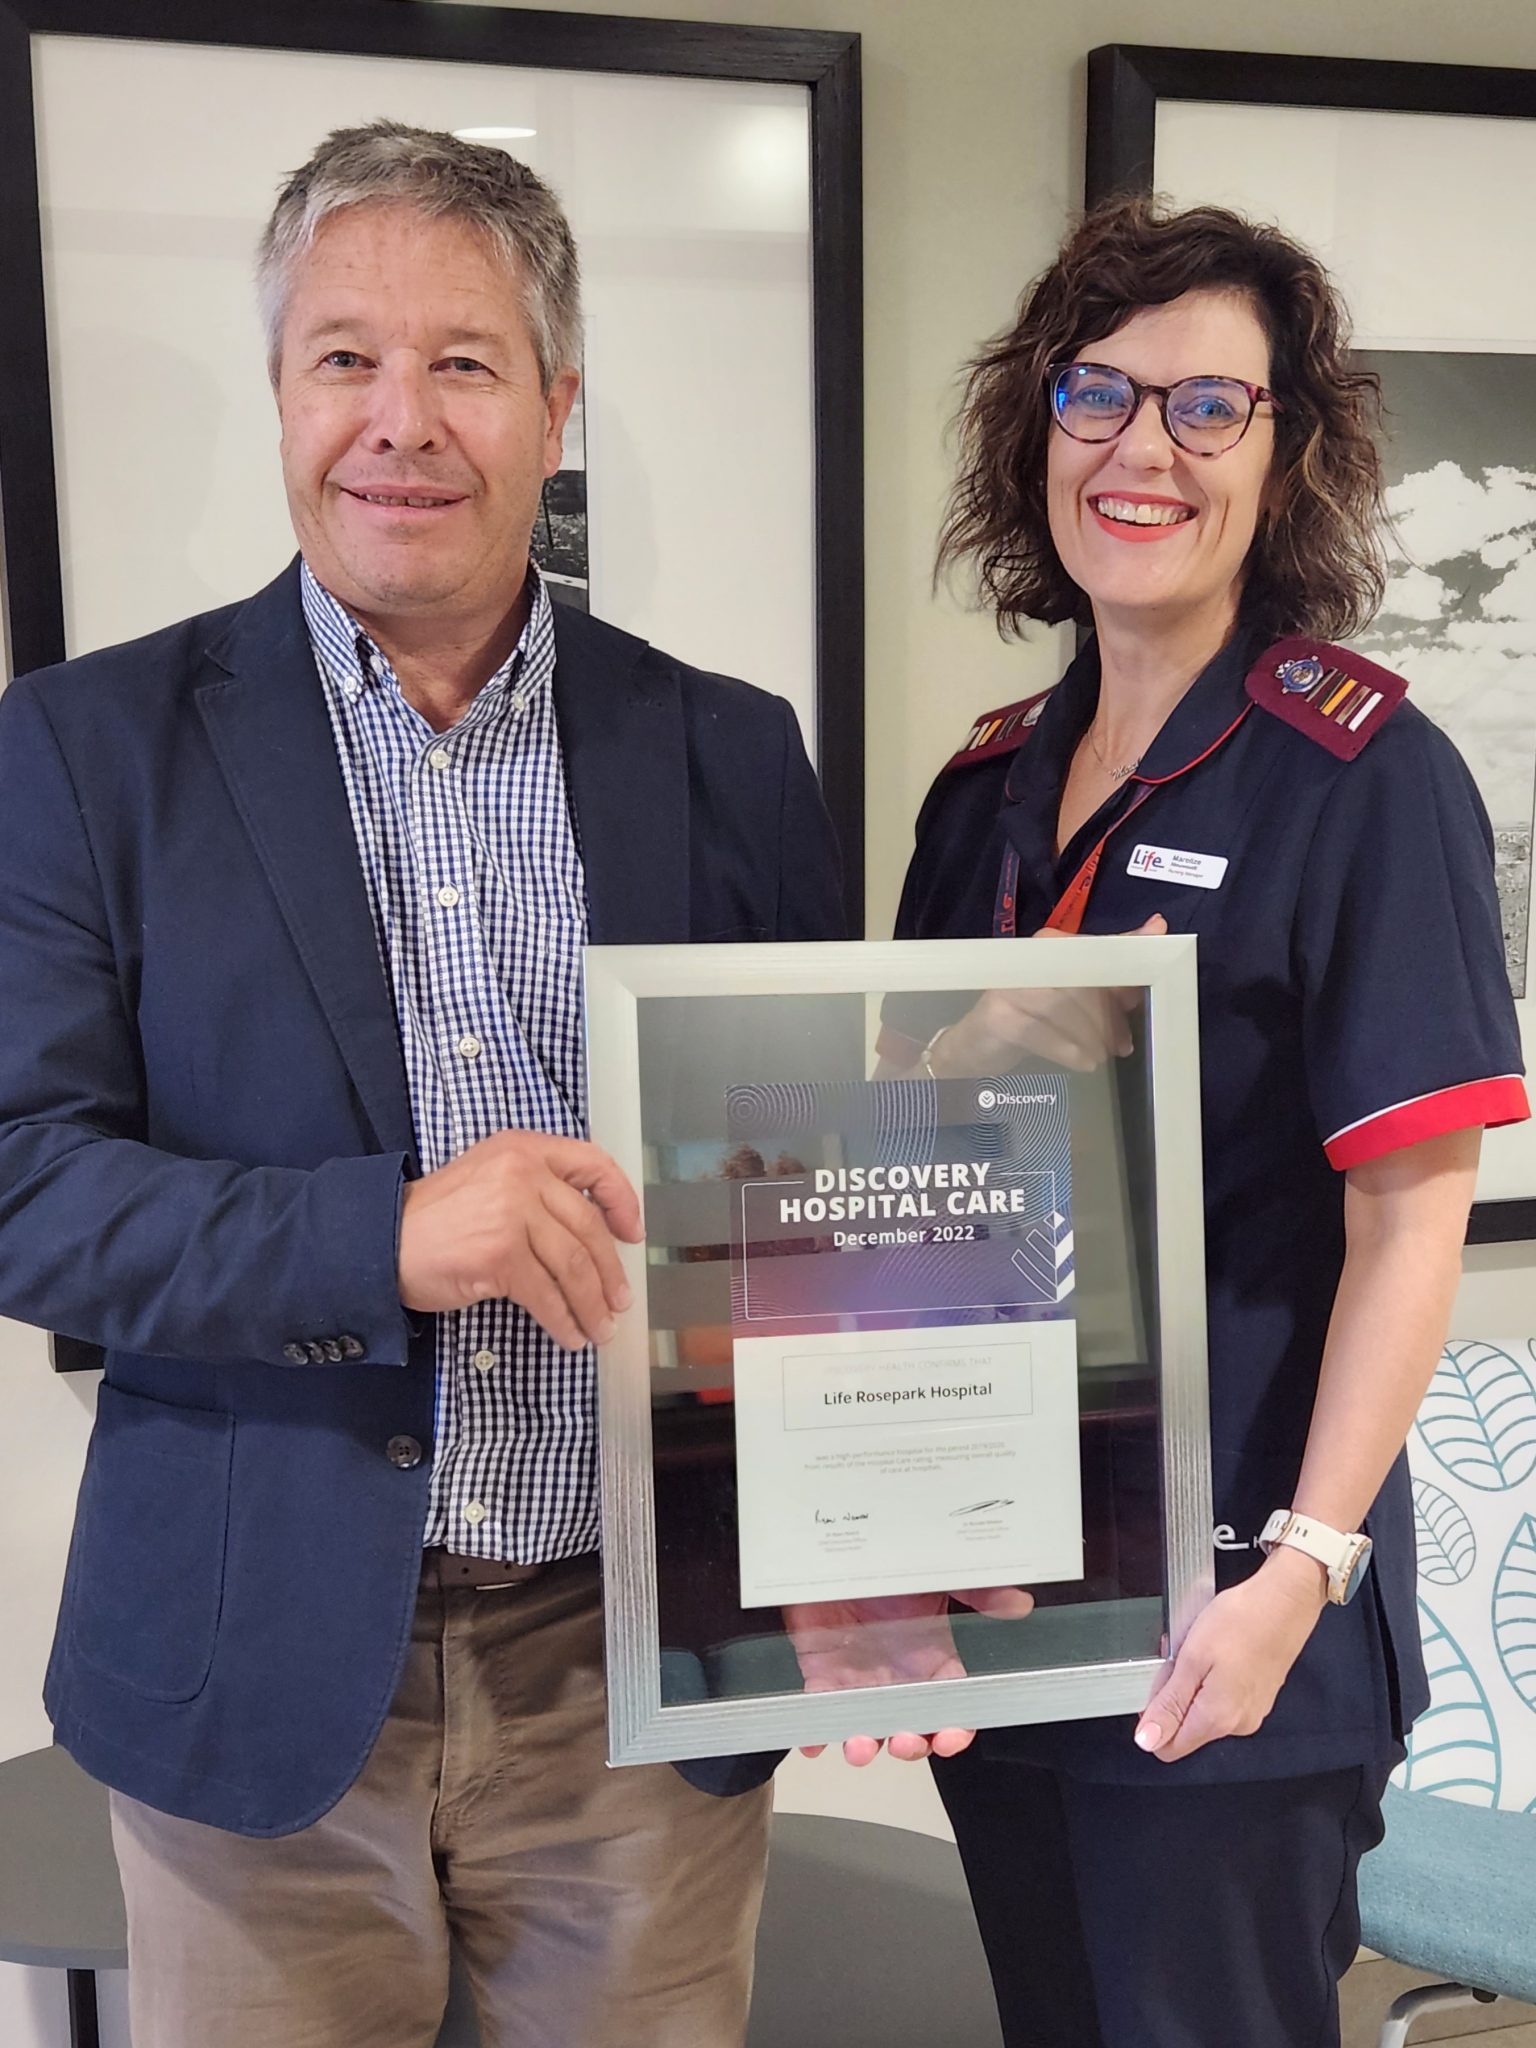 Life Rosepark Hospital recognised for clinical excellence in patient care